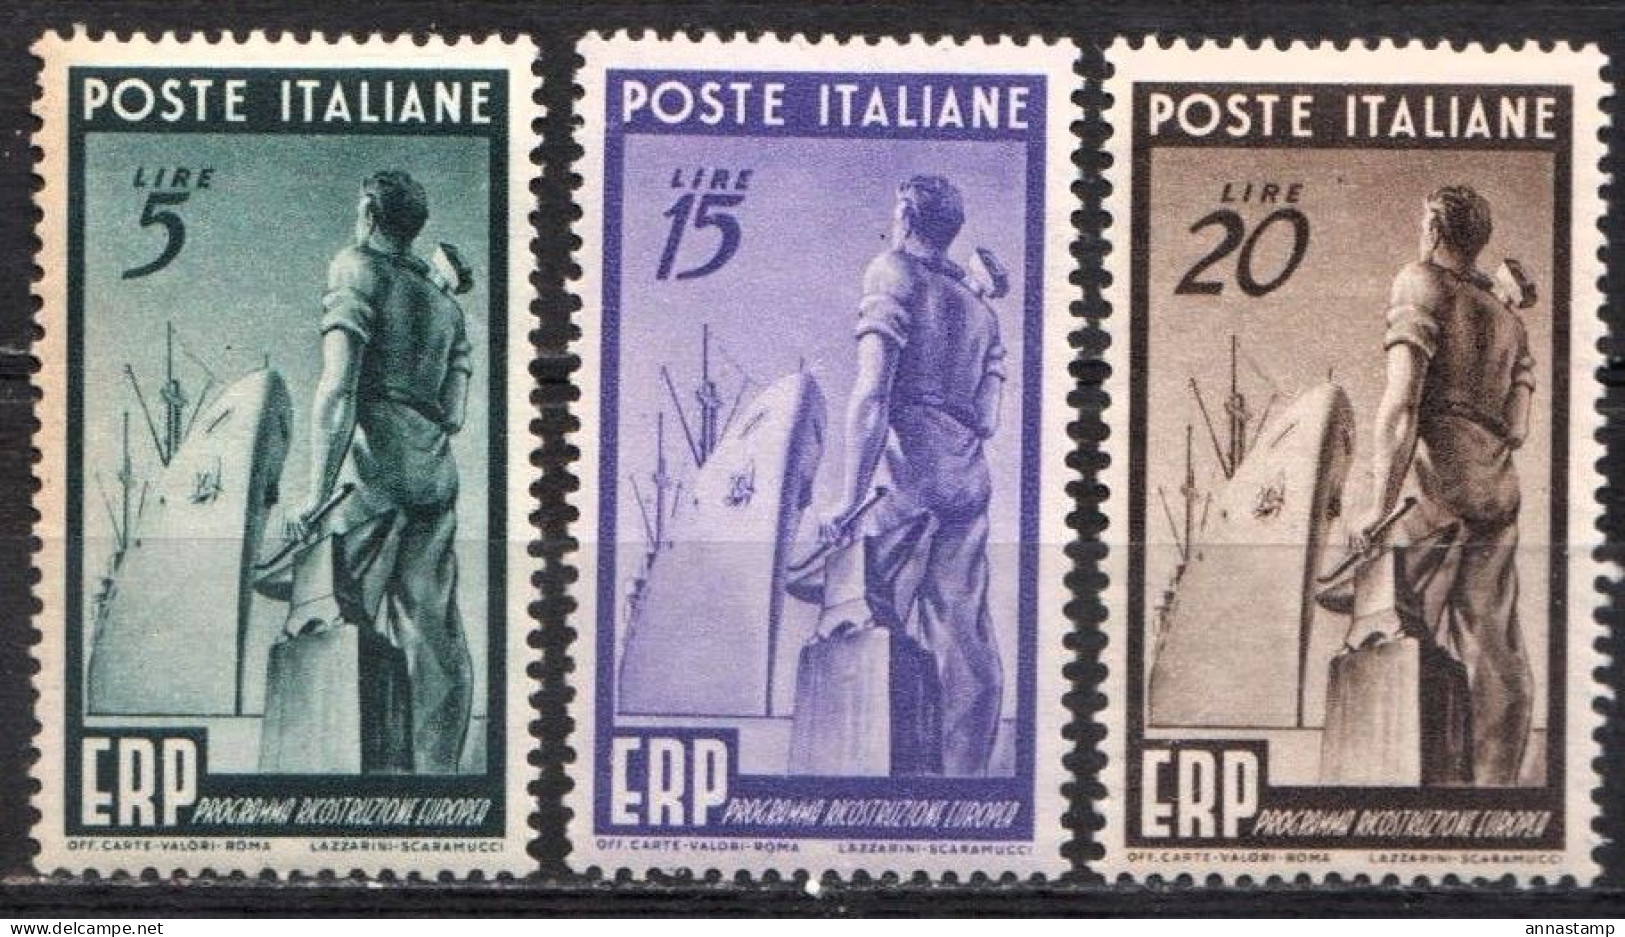 Italy MNH Stamps, But With Faults - 1946-60: Nuevos